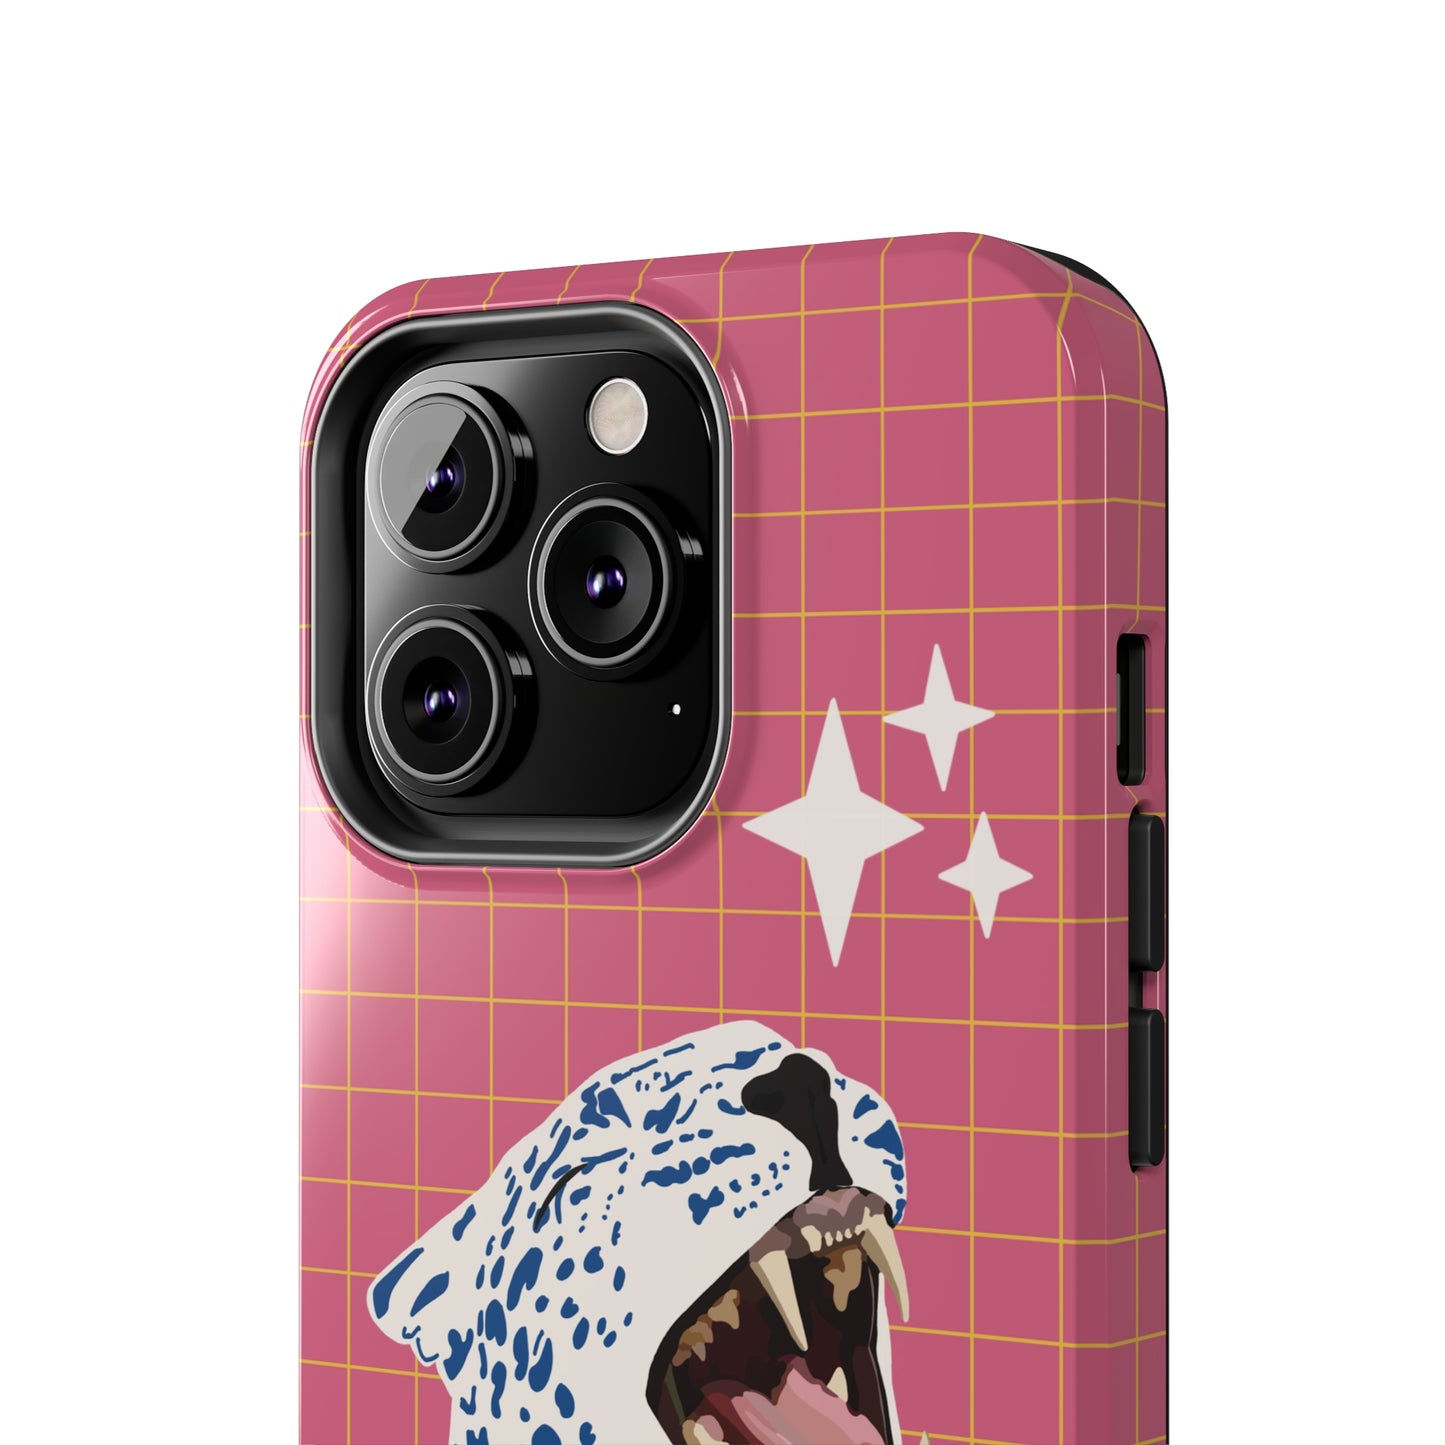 White Tiger with Blue Spots Phone Case – Fierce Design on Pink and Yellow Plaid Background